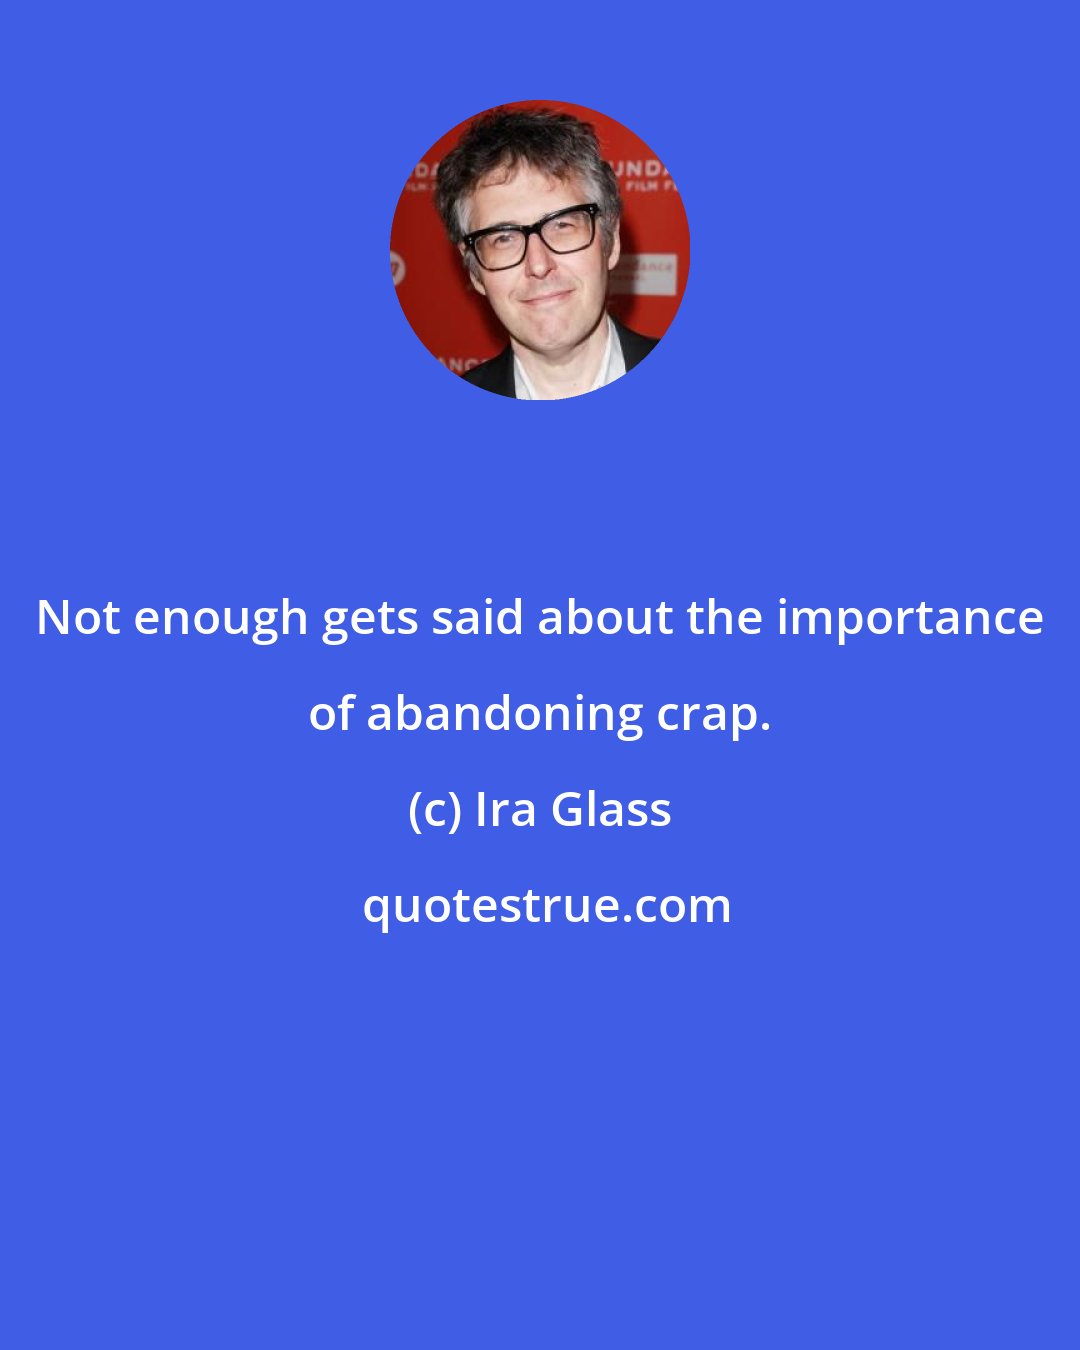 Ira Glass: Not enough gets said about the importance of abandoning crap.